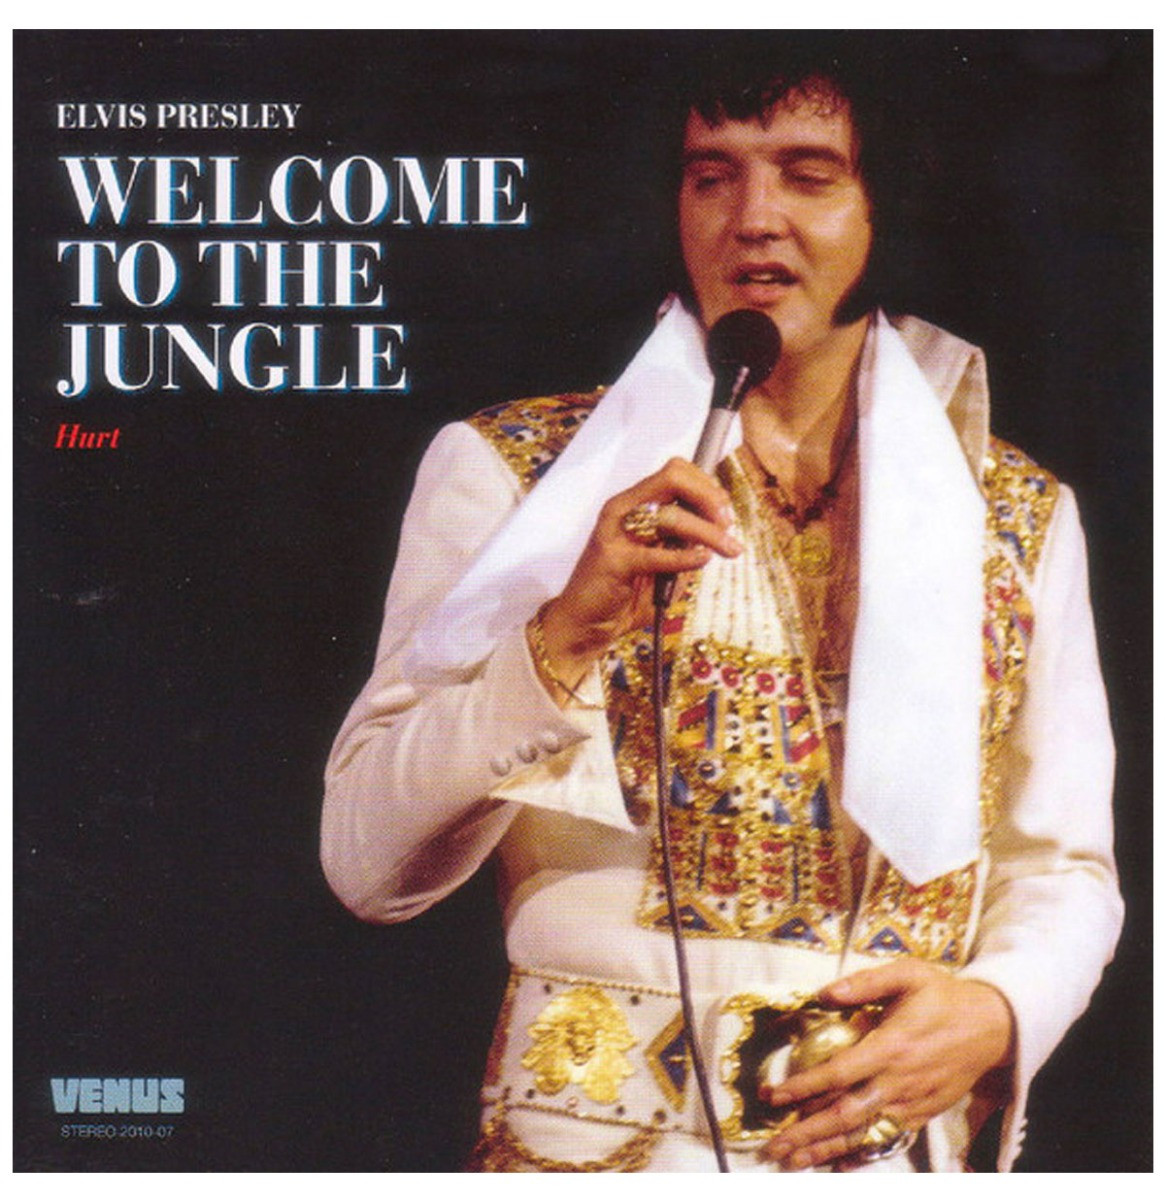 Elvis Presley - Welcome to the Jungle - Hurt 1976 CD